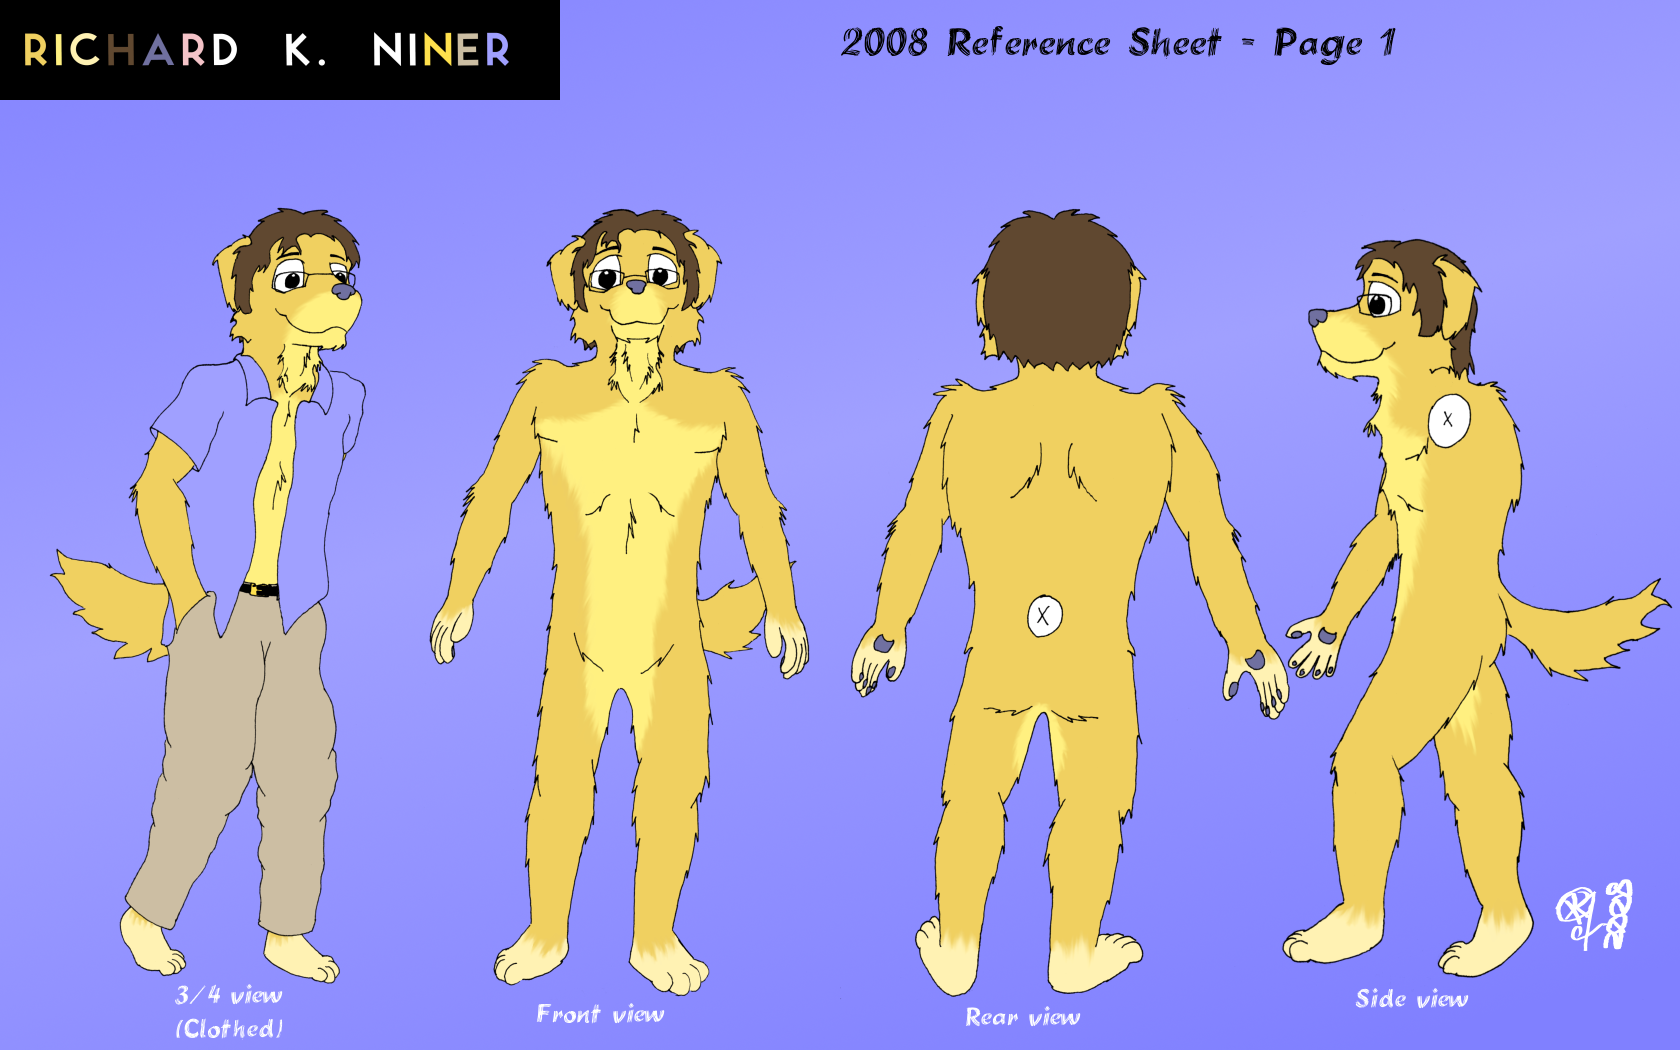 2008 Reference Sheet, Page 1
